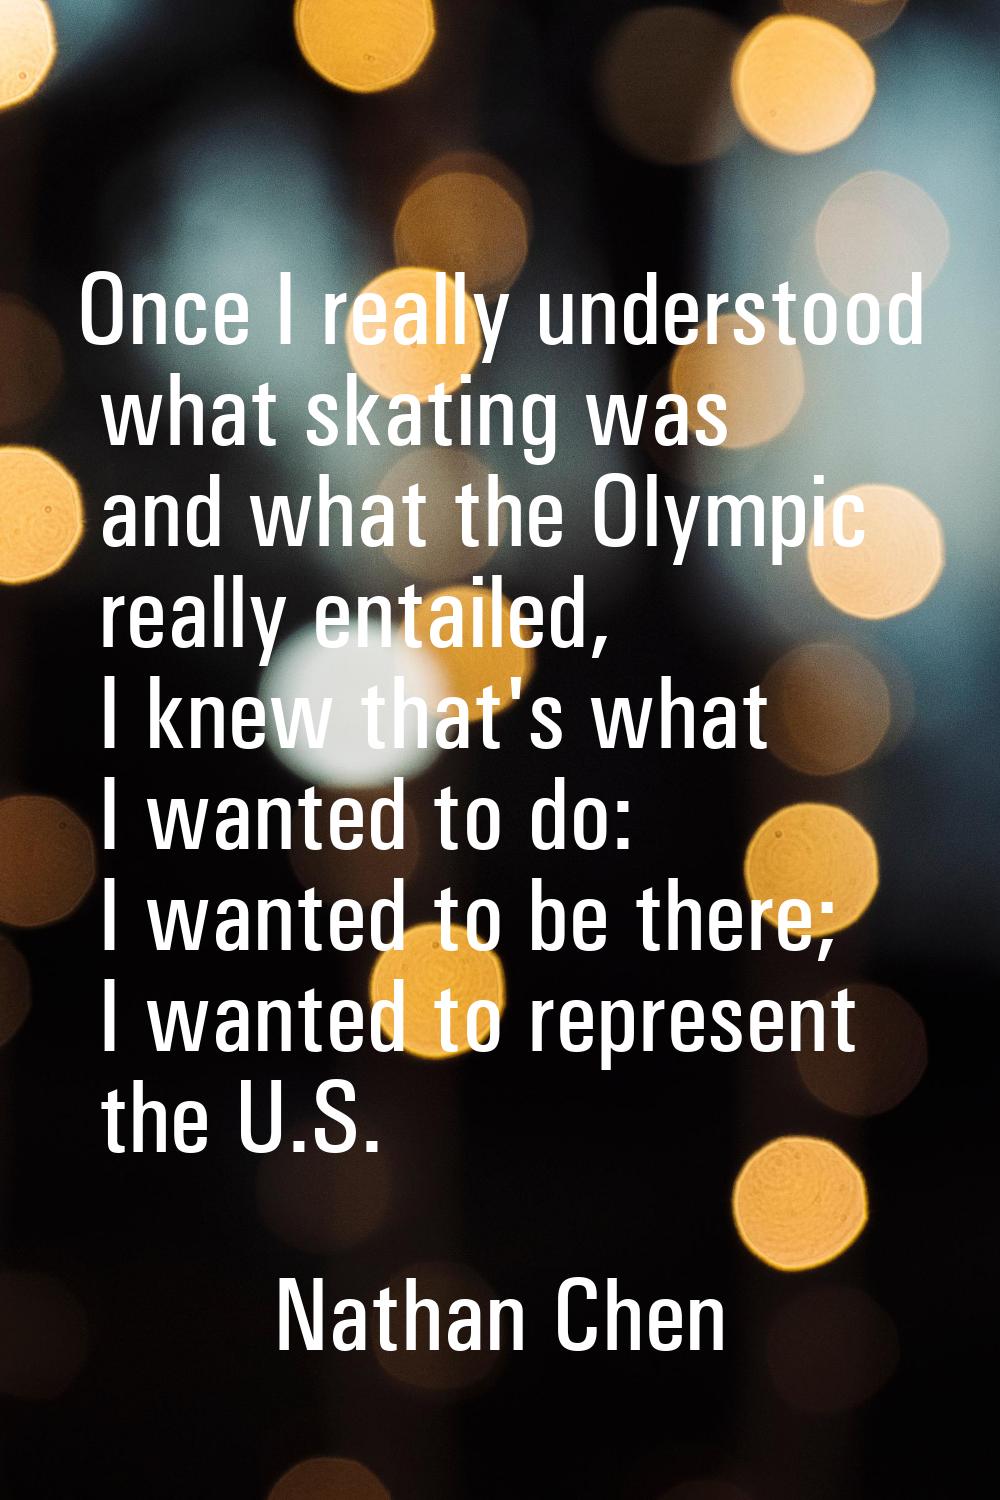 Once I really understood what skating was and what the Olympic really entailed, I knew that's what 